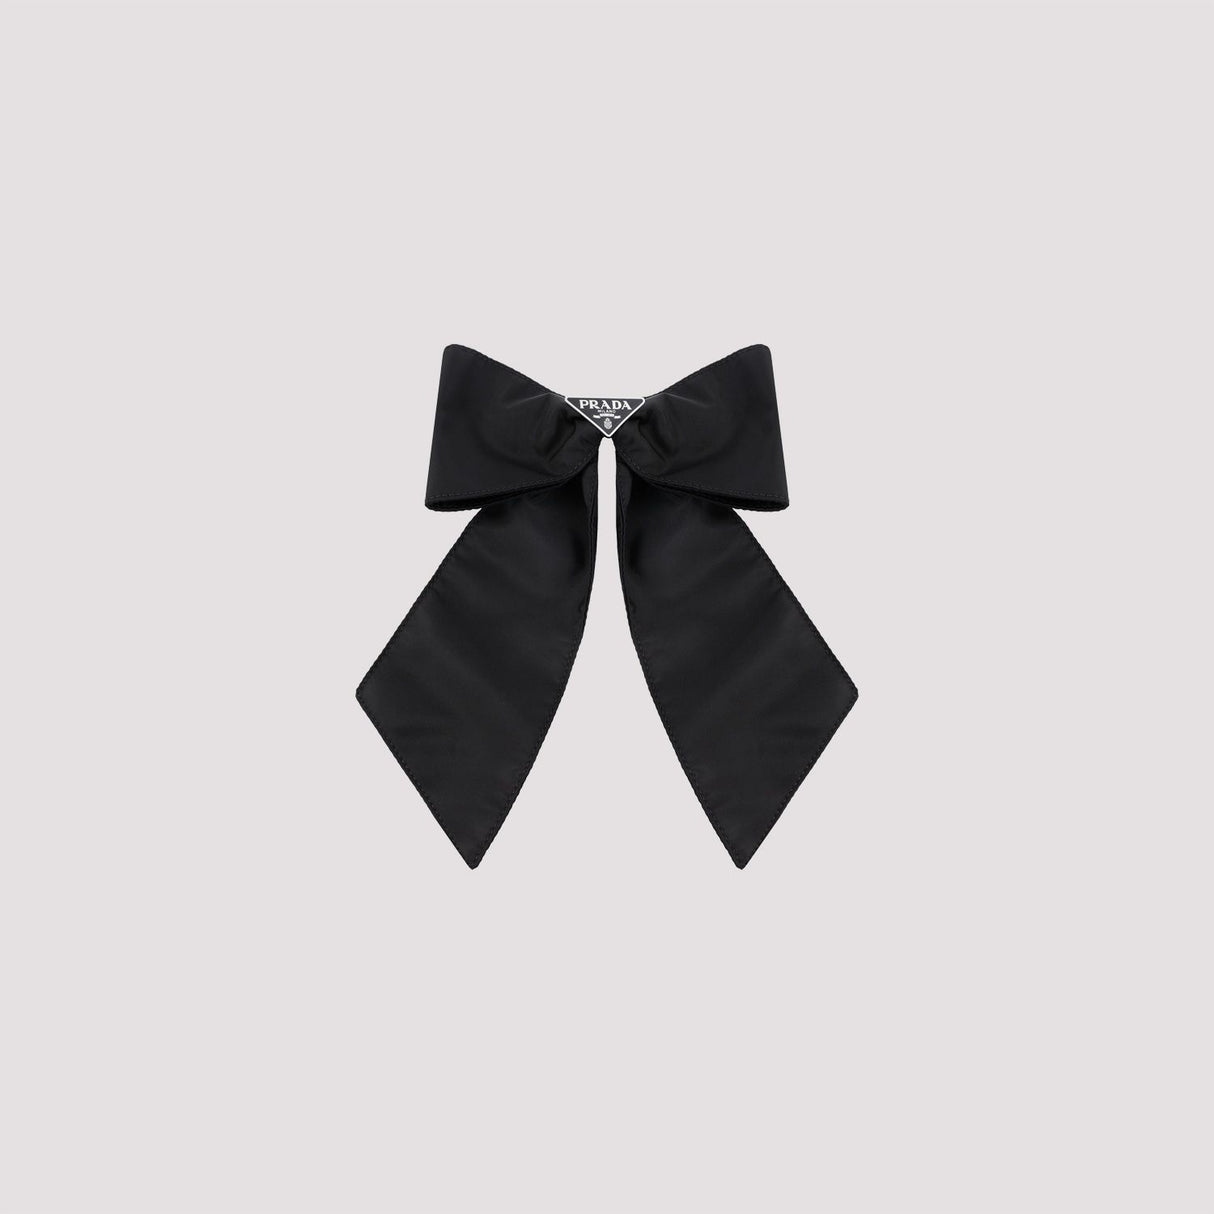 PRADA Stylish Black Hair Clip for Women - Sustainable and Chic